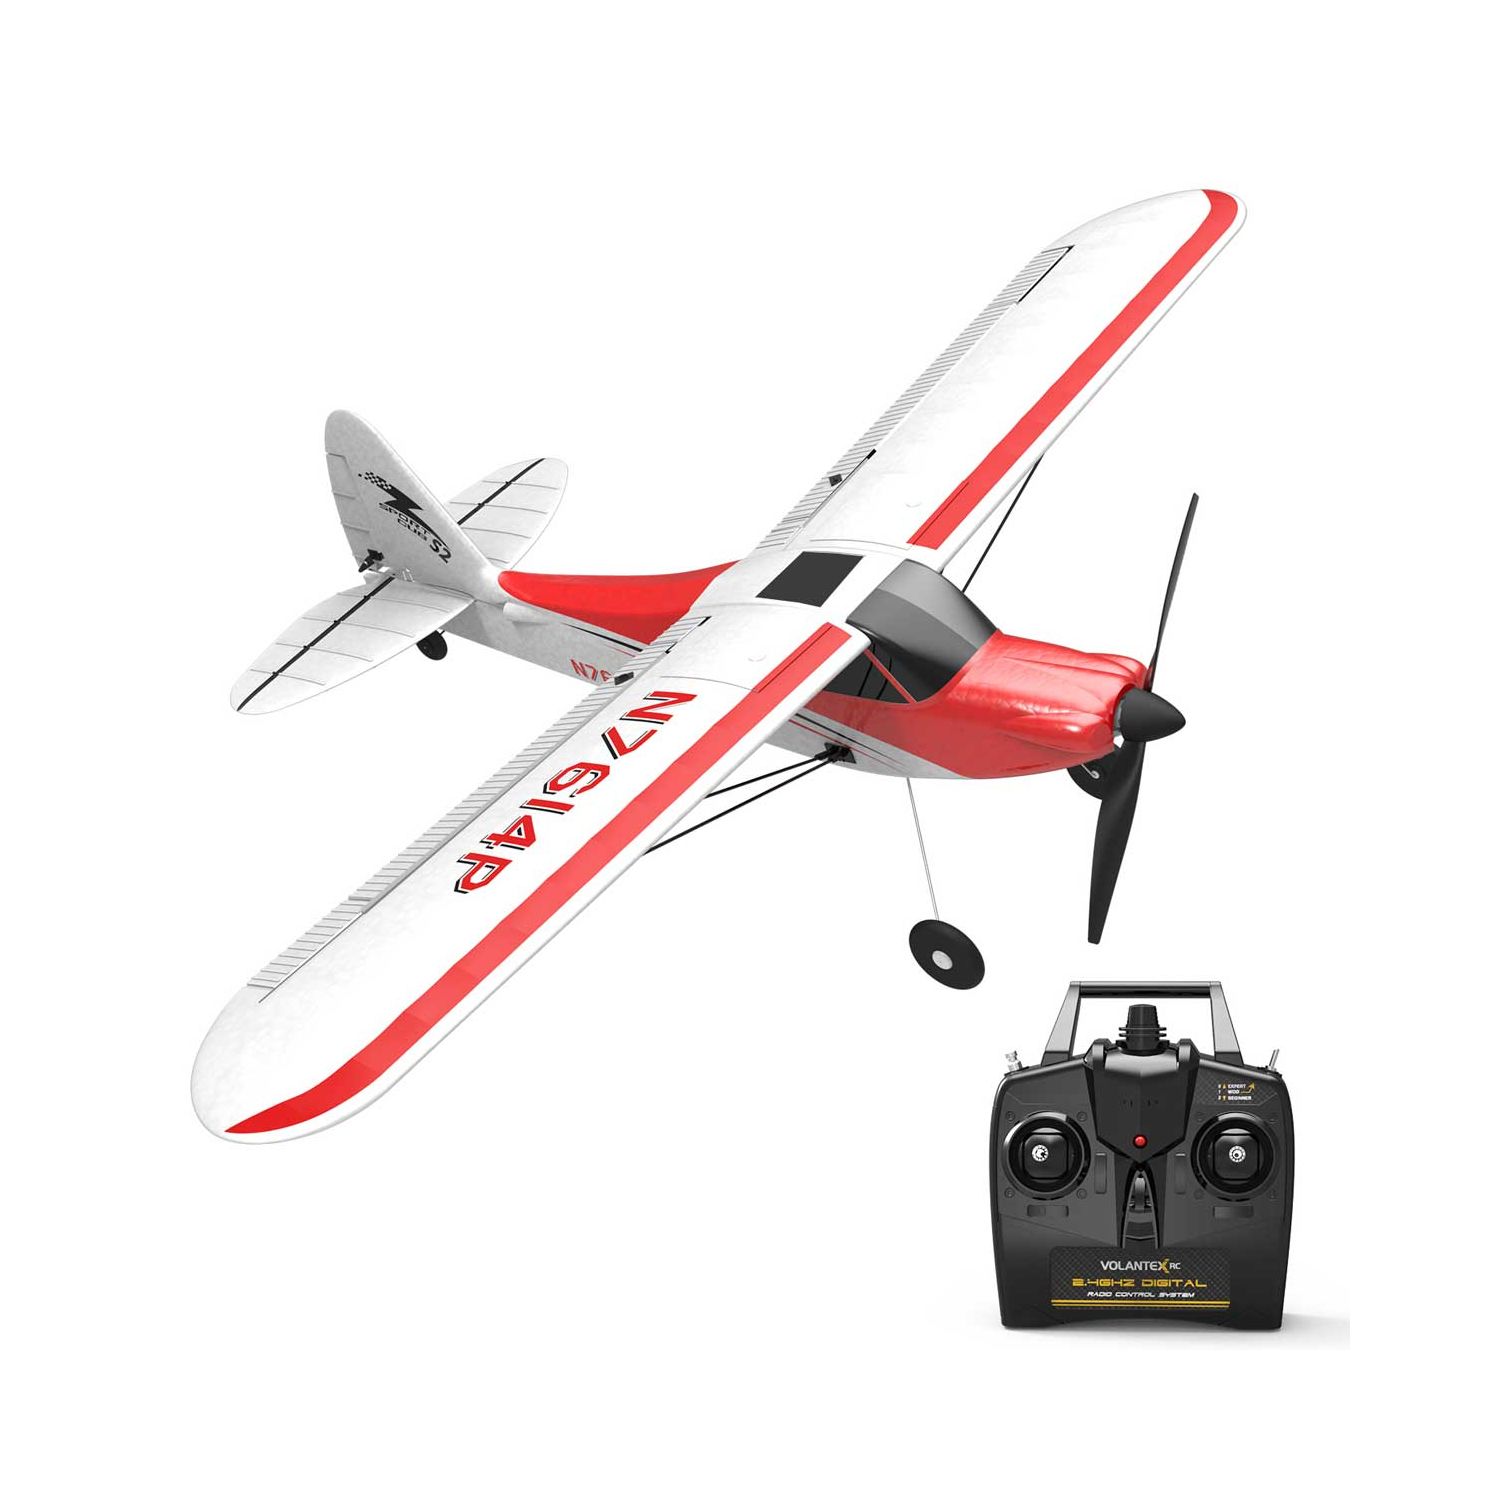 Ex-hOBBY Sport Cub 500 4 Channel Beginner Airplane with 6-Axis Gyro System and One-key U-Turn Aerobatic Function (761-4) READY-t